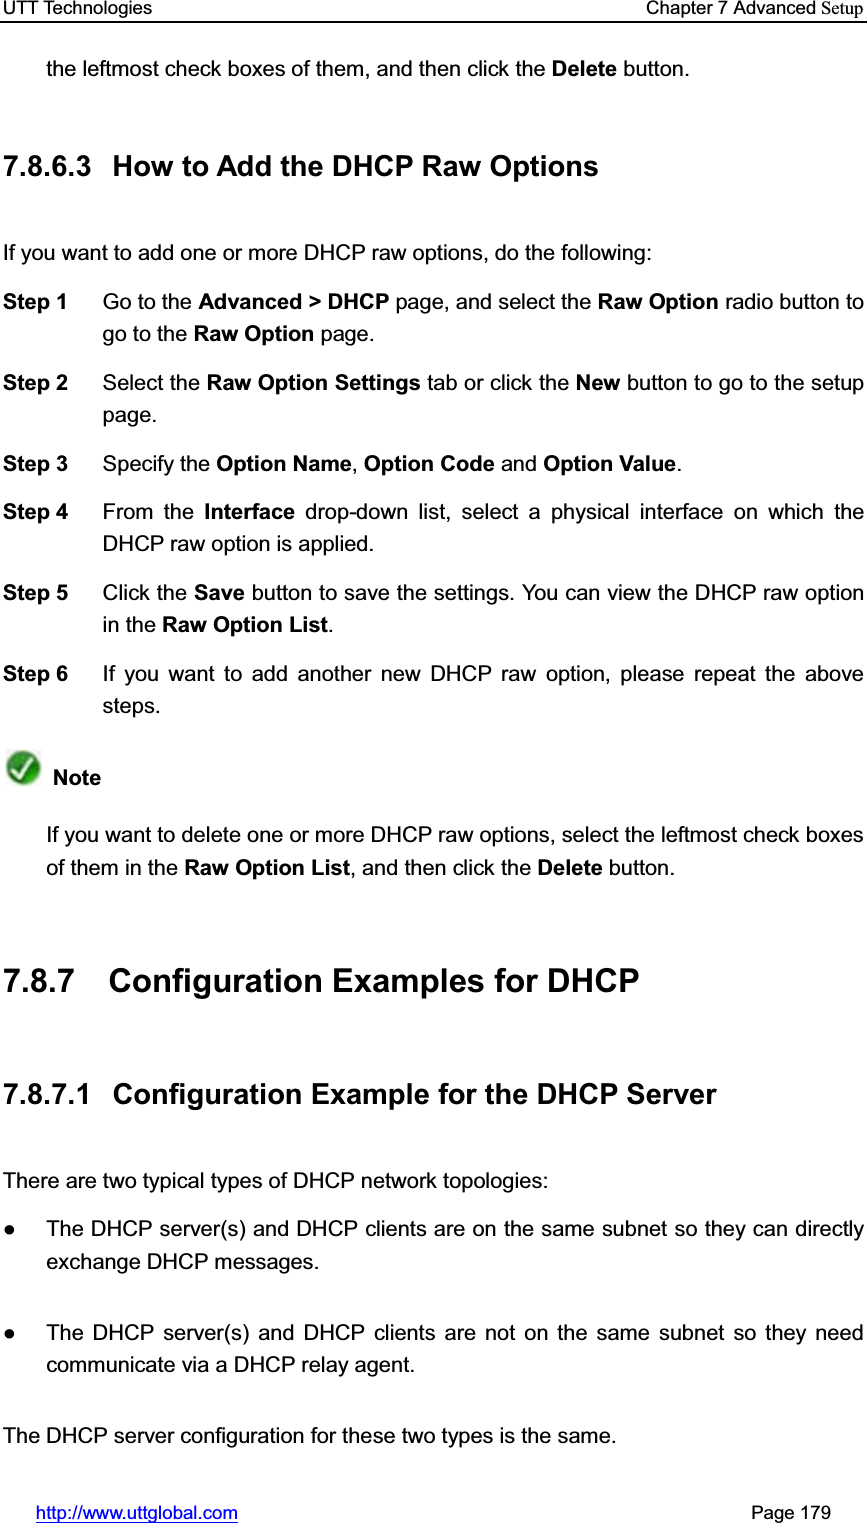 UTT Technologies    Chapter 7 Advanced Setuphttp://www.uttglobal.com                                                       Page 179 the leftmost check boxes of them, and then click the Delete button. 7.8.6.3  How to Add the DHCP Raw Options If you want to add one or more DHCP raw options, do the following:   Step 1  Go to the Advanced &gt; DHCP page, and select the Raw Option radio button to go to the Raw Option page. Step 2  Select the Raw Option Settings tab or click the New button to go to the setup page. Step 3  Specify the Option Name,Option Code and Option Value.Step 4  From the Interface drop-down list, select a physical interface on which the DHCP raw option is applied. Step 5  Click the Save button to save the settings. You can view the DHCP raw option in the Raw Option List.Step 6  If you want to add another new DHCP raw option, please repeat the above steps. NoteIf you want to delete one or more DHCP raw options, select the leftmost check boxes of them in the Raw Option List, and then click the Delete button. 7.8.7 Configuration Examples for DHCP 7.8.7.1  Configuration Example for the DHCP Server There are two typical types of DHCP network topologies:   Ɣ  The DHCP server(s) and DHCP clients are on the same subnet so they can directly exchange DHCP messages. Ɣ  The DHCP server(s) and DHCP clients are not on the same subnet so they need communicate via a DHCP relay agent. The DHCP server configuration for these two types is the same. 